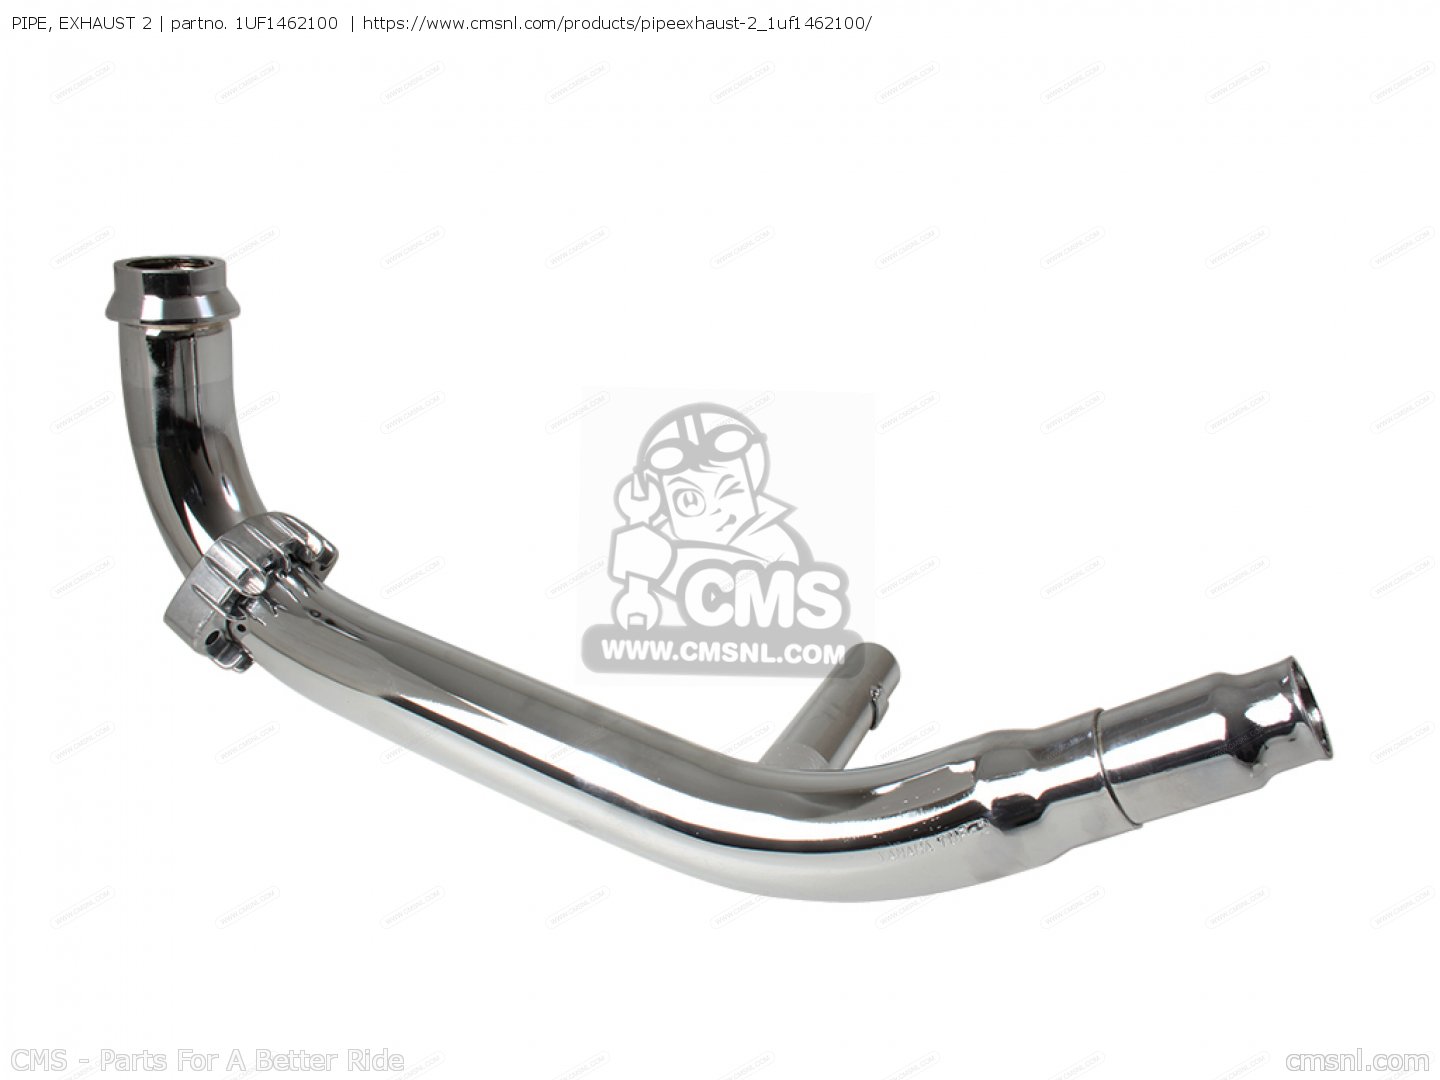 PIPE, EXHAUST 2 for FZX750 1988 2MU 